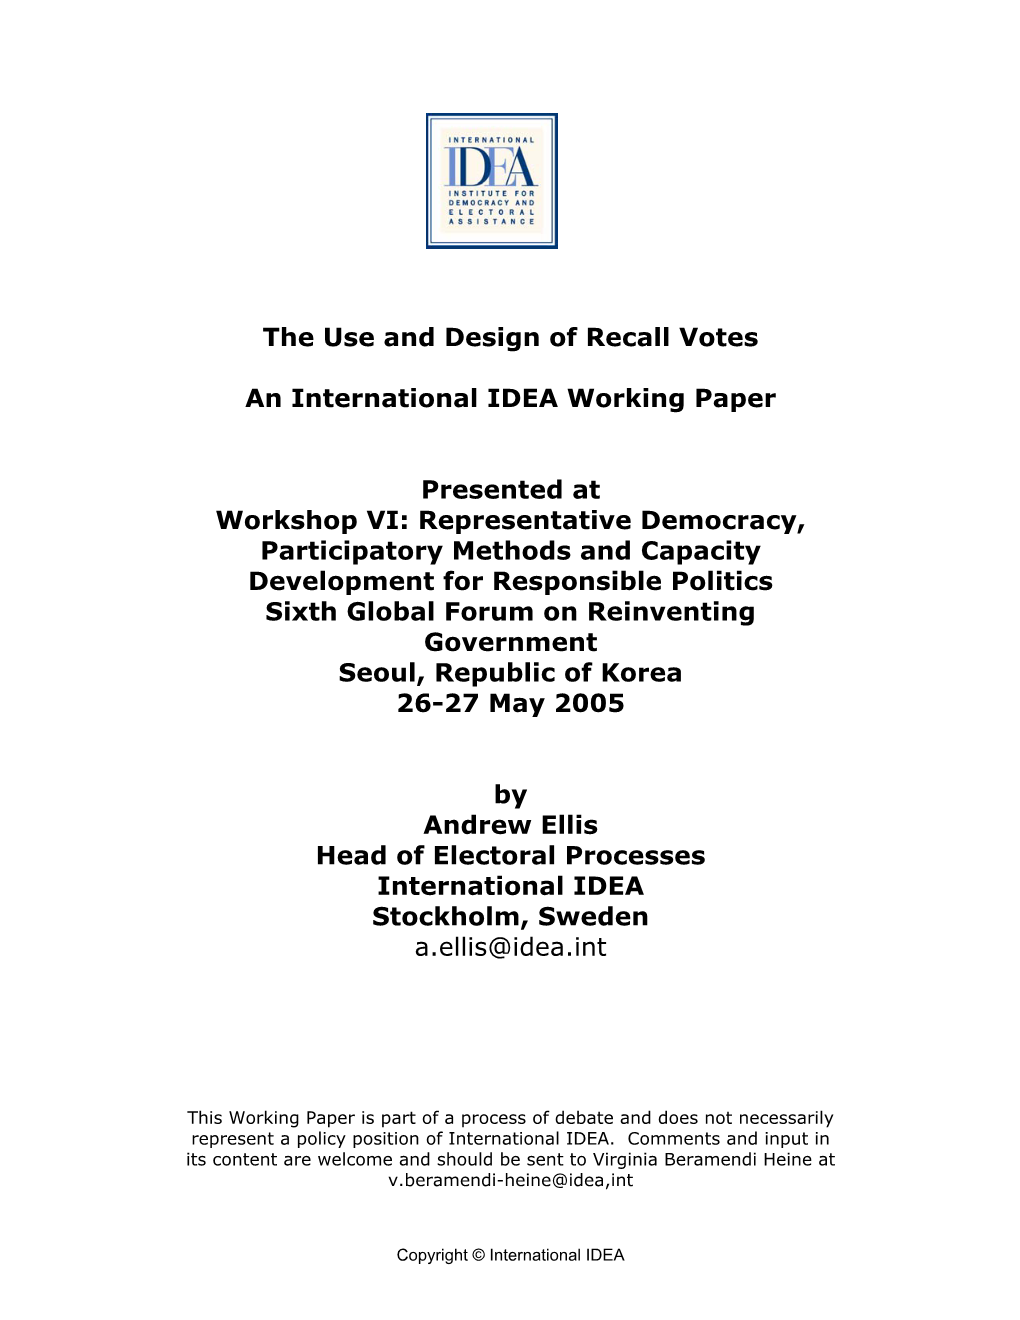 The Use and Design of Recall Votes an International IDEA Working